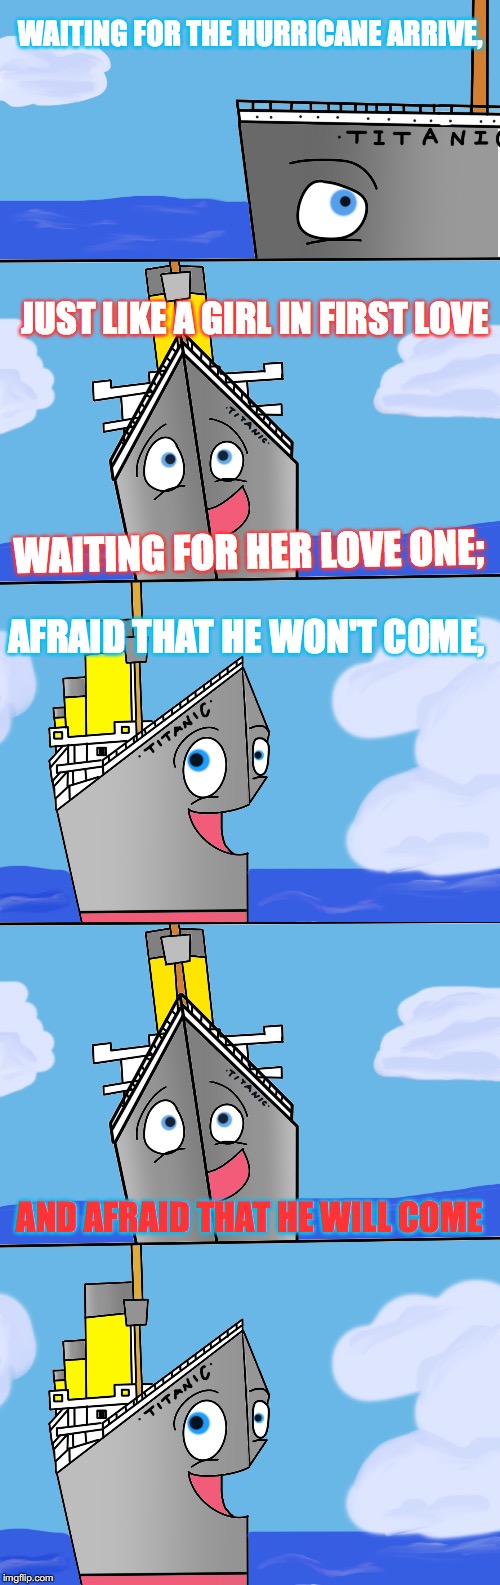 Bad Pun Titanic #22: Hurricane joke 2 | WAITING FOR THE HURRICANE ARRIVE, JUST LIKE A GIRL IN FIRST LOVE; WAITING FOR HER LOVE ONE;; AFRAID THAT HE WON'T COME, AND AFRAID THAT HE WILL COME | image tagged in bad pun,titanic,hurricane,love,girl,jokes | made w/ Imgflip meme maker